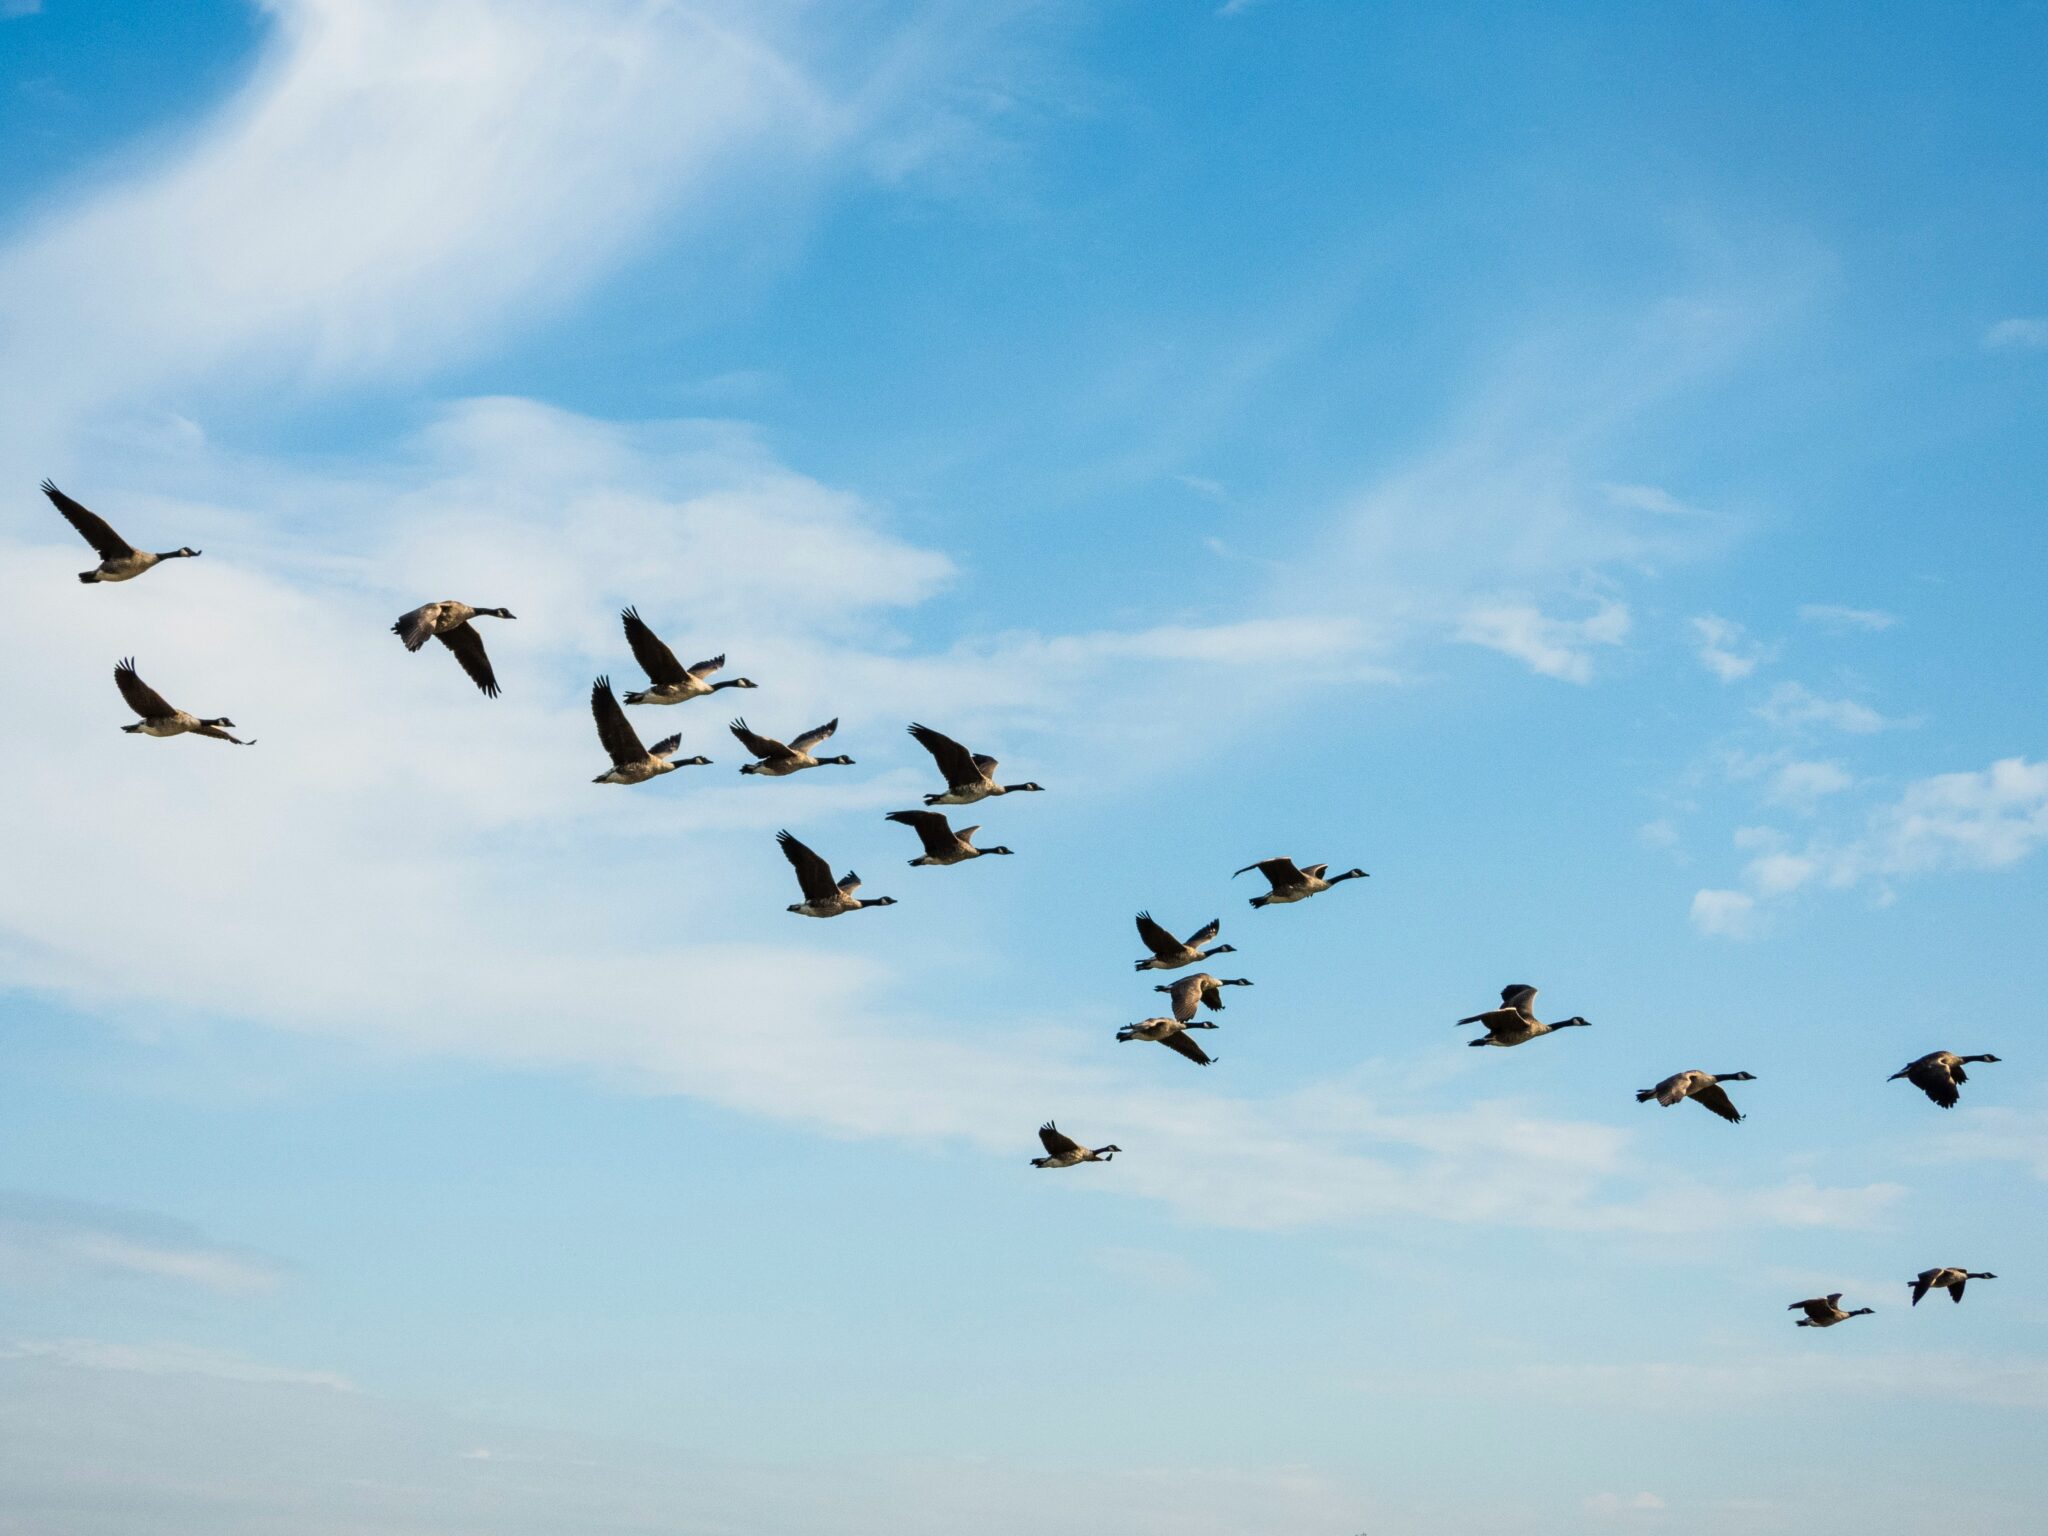 geese flying | Photo by Nick Fewings on Unsplash